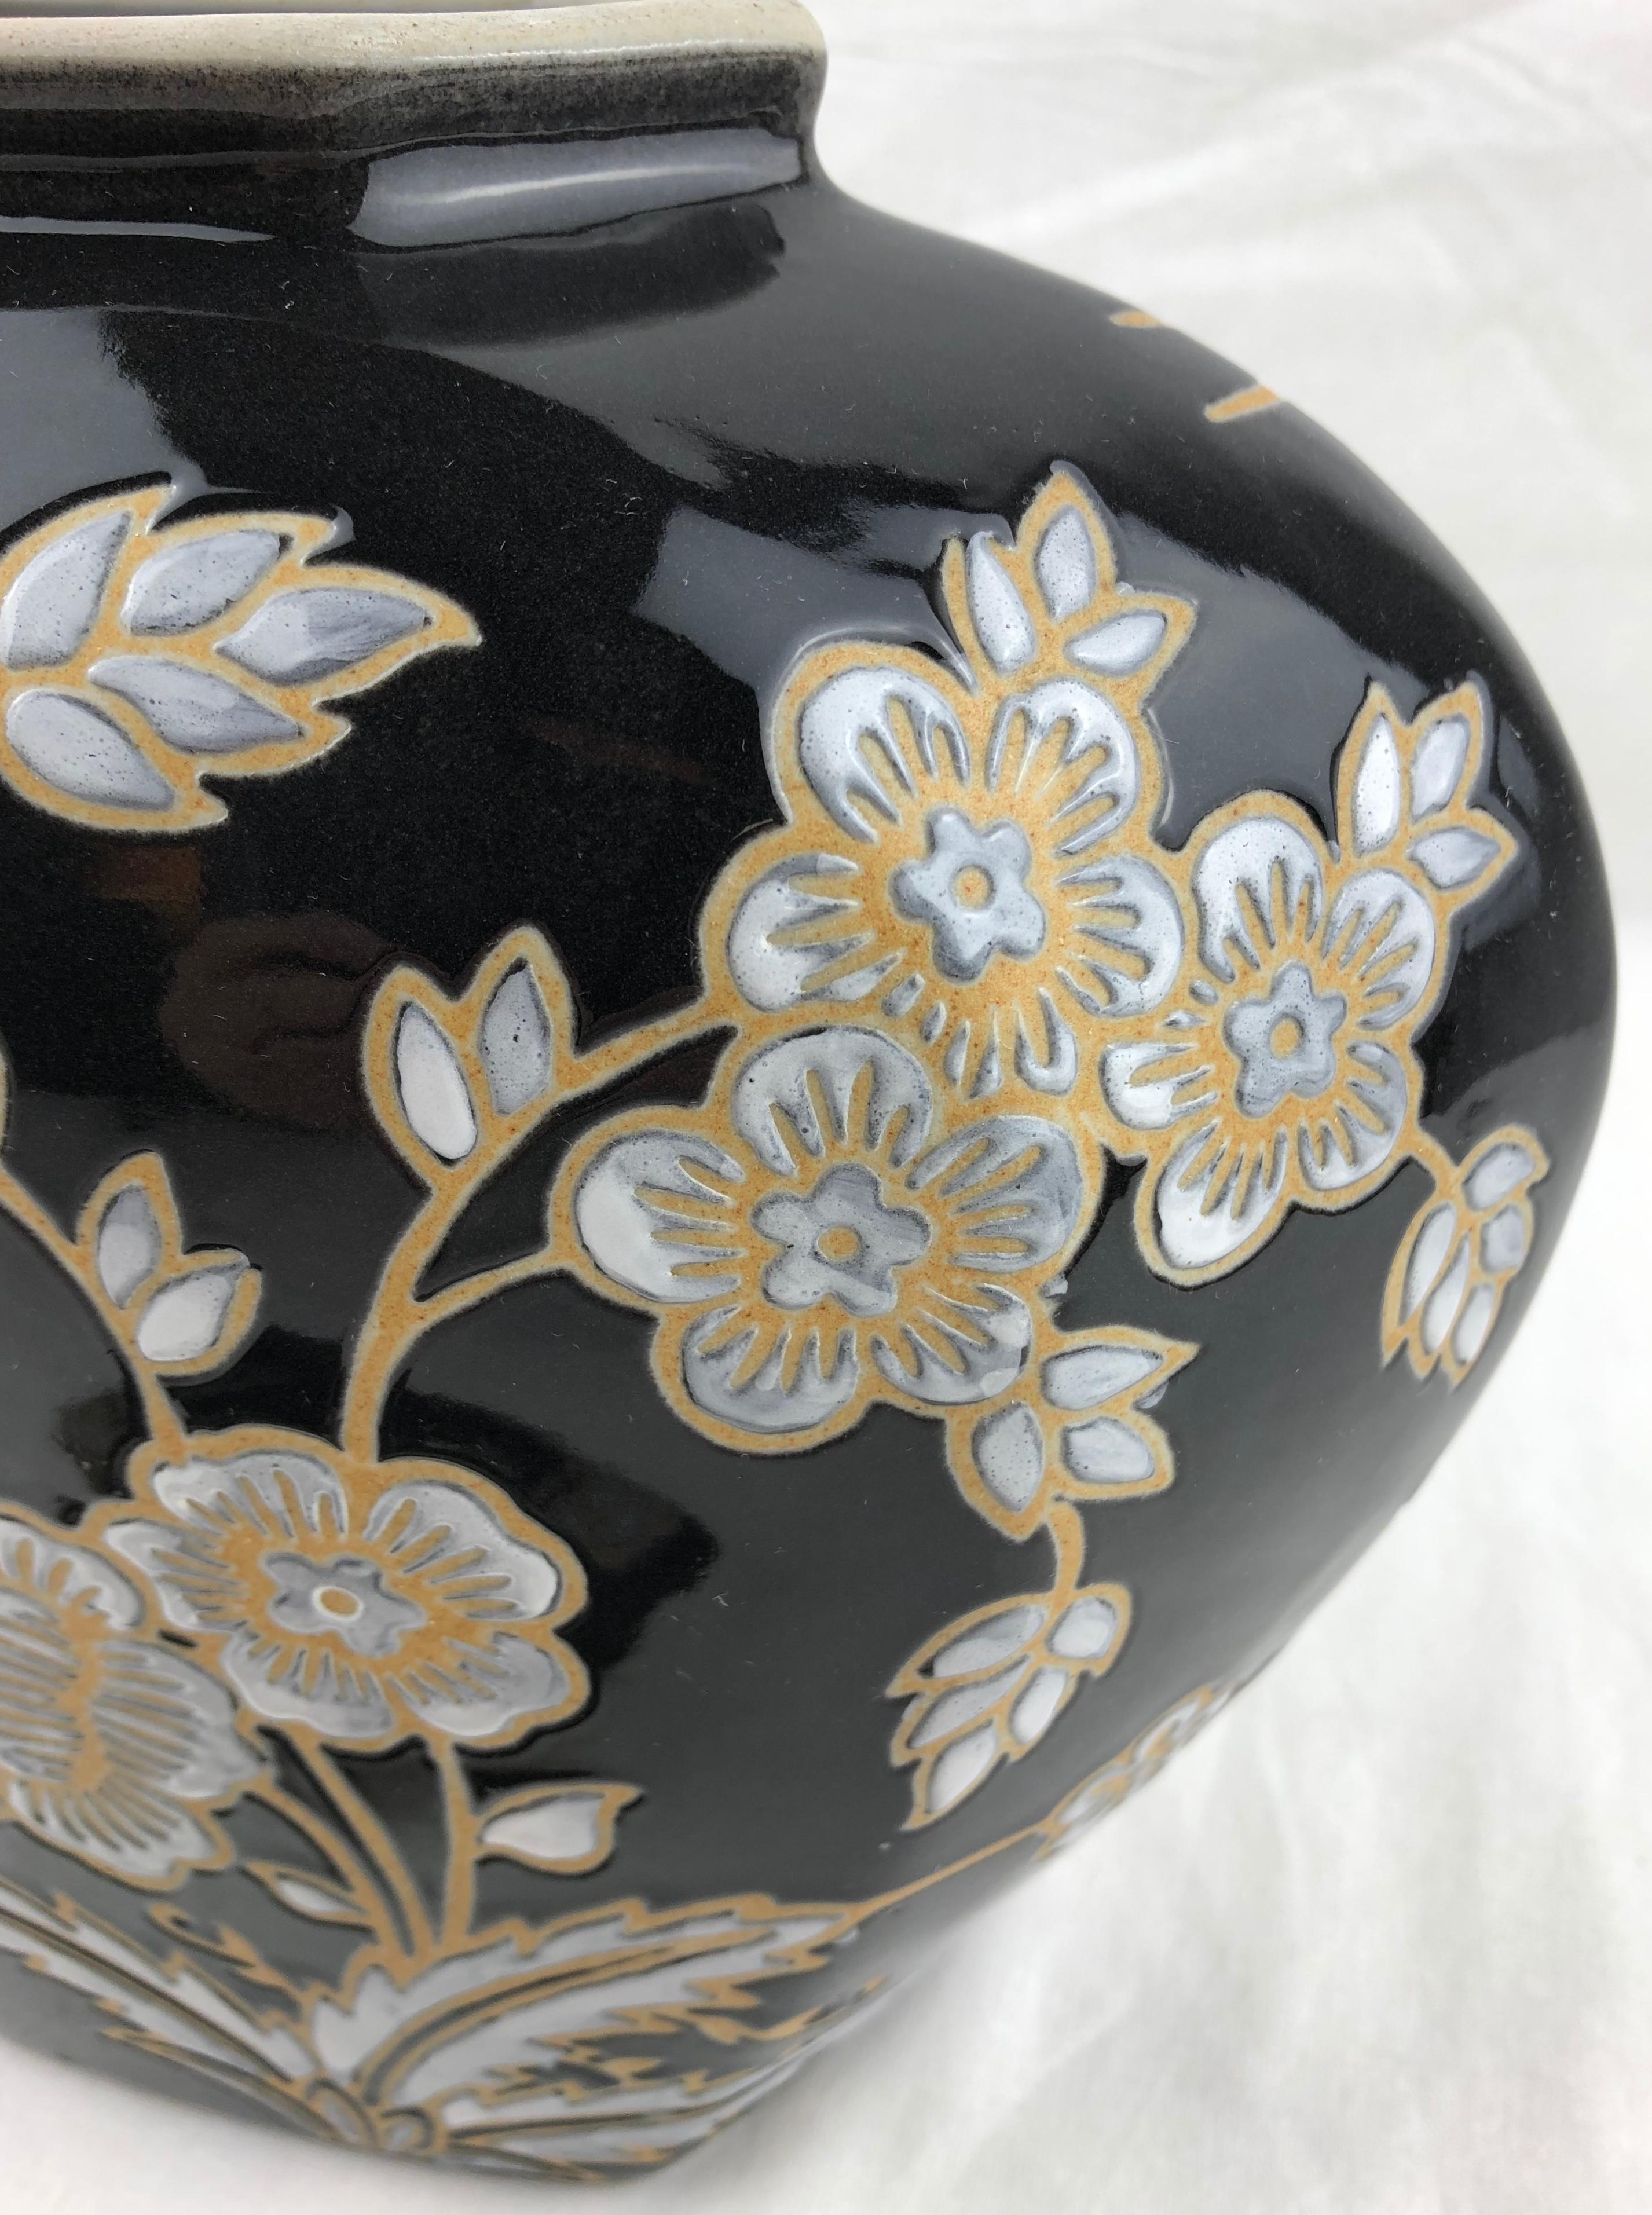 French Black and Antique White Majolica Lidded Jar with Molded Floral Decor In Good Condition For Sale In Miami, FL